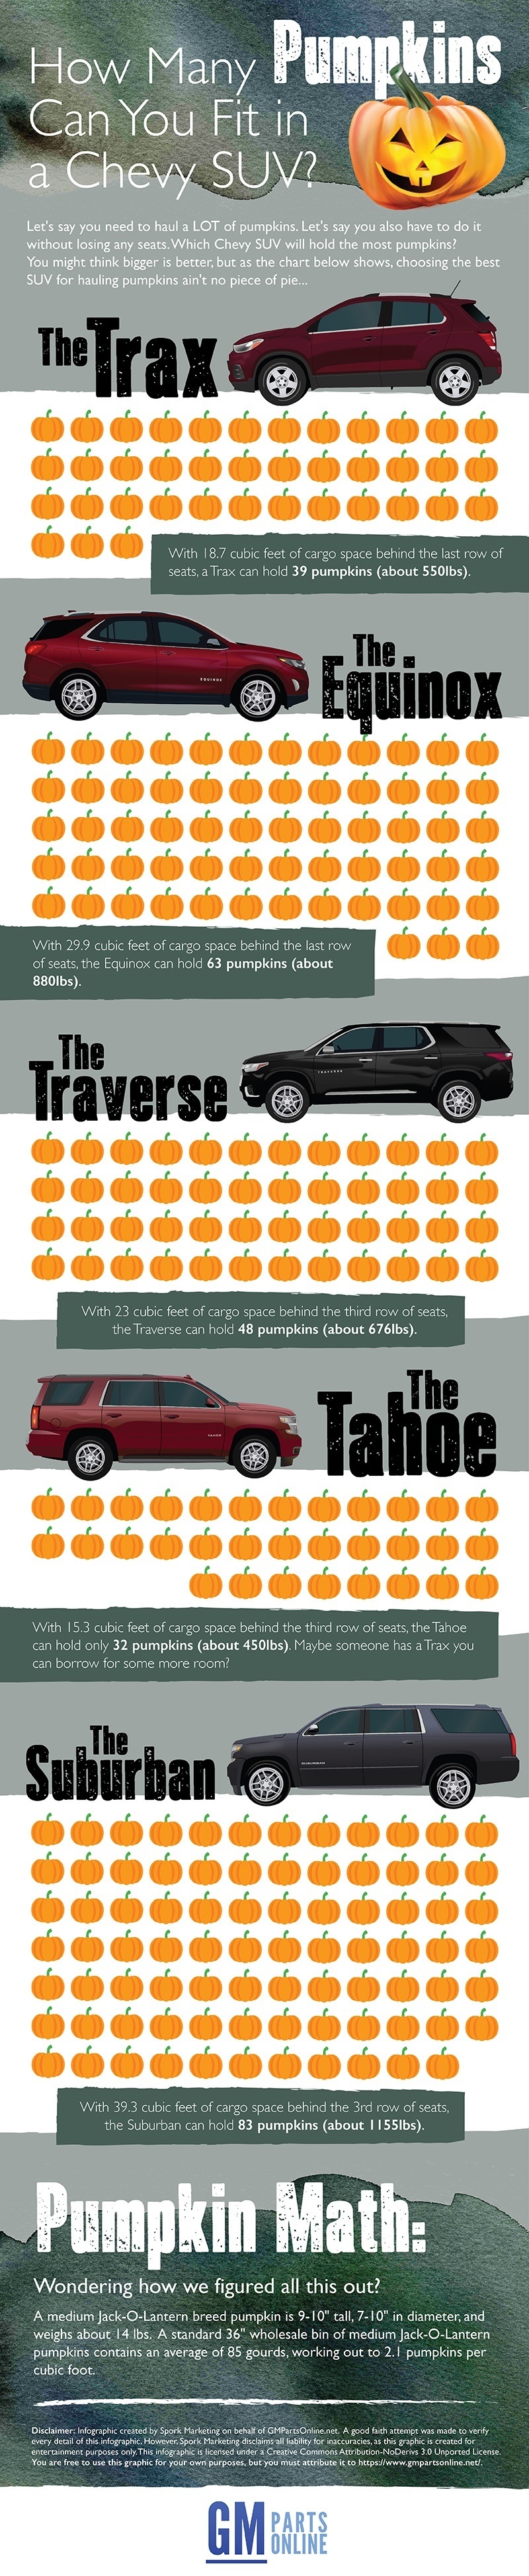 How Many Pumpkins Can You Stuff In A Chevy"